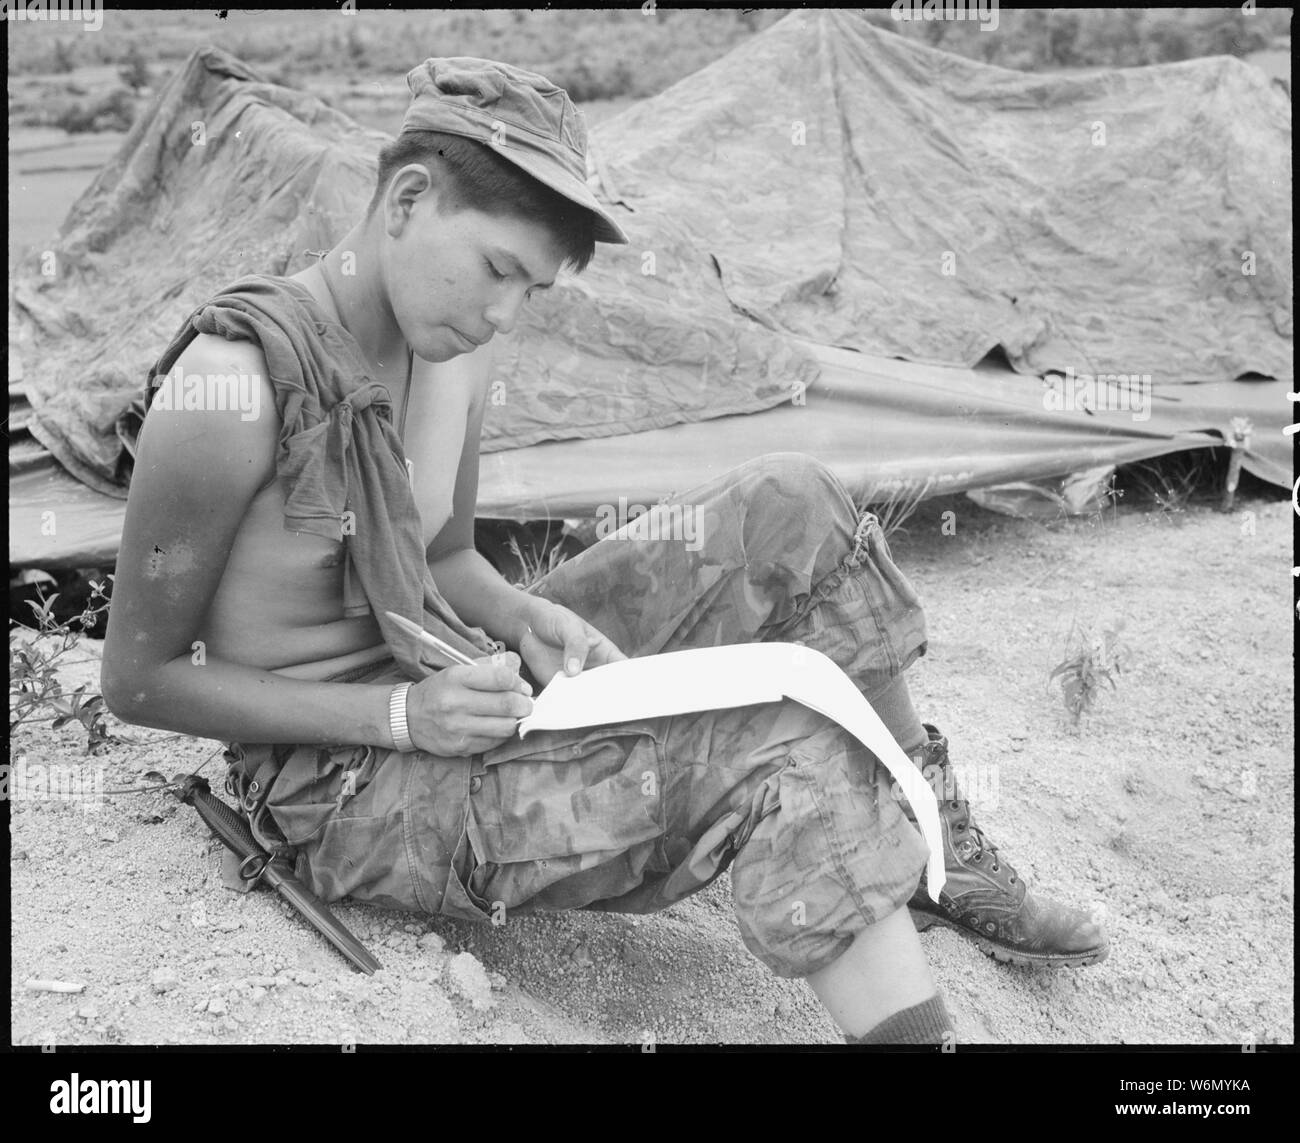 Vietnam....Private First Class Joseph Big Medicine Jr., a Cheyenne Indian, writes a letter to his family in the United States. He is a member of Company G, 2nd Battalion, 1st Marine Regiment, on a search, clear and destroy mission, seven miles east of the Marine Combat Base at An Hoa. Stock Photo